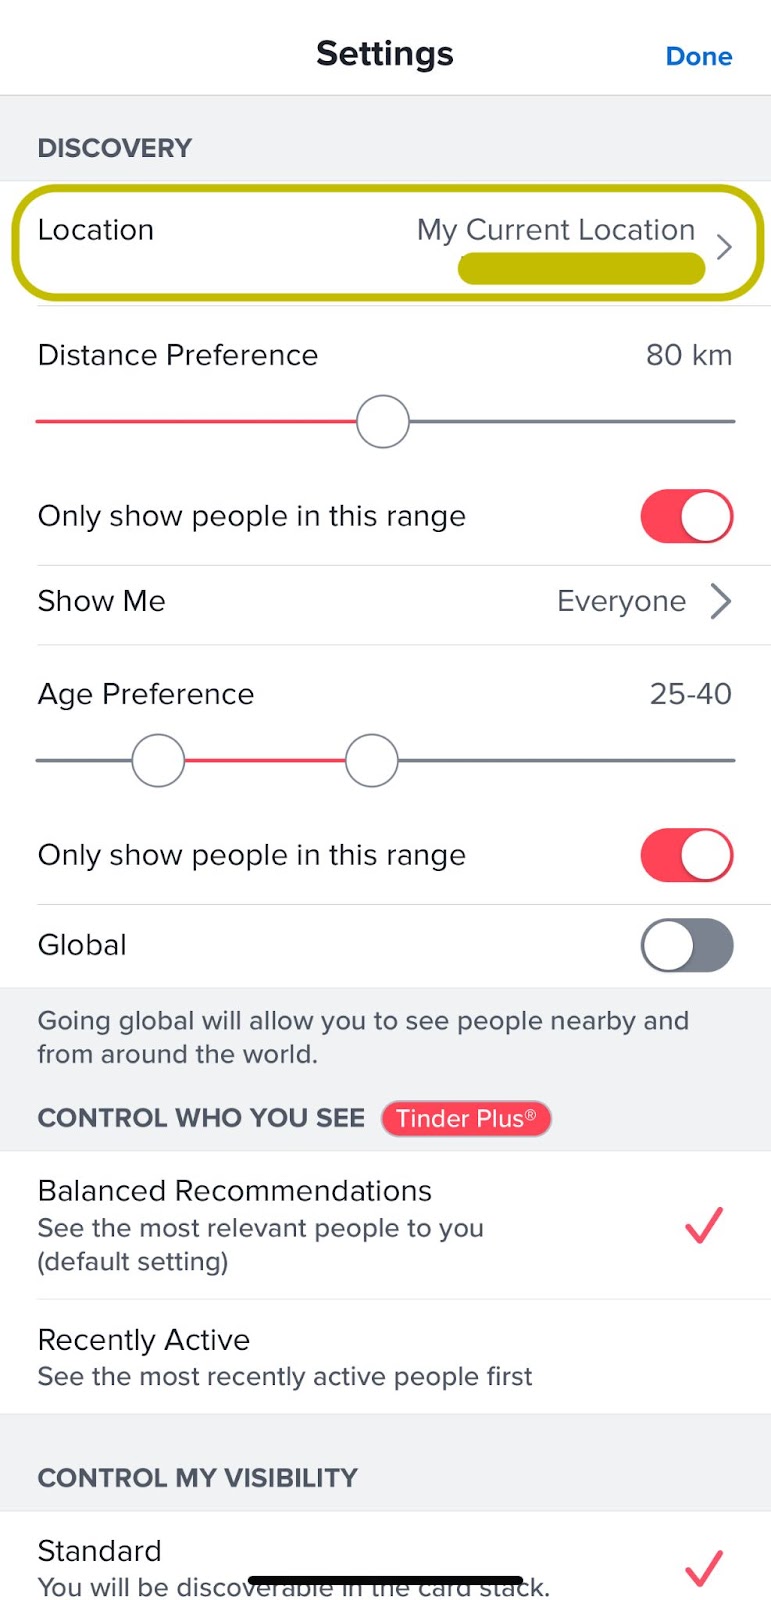  Tinder mobile phone interface showing the different setting options including location, distance preference, age preference, and visibility.